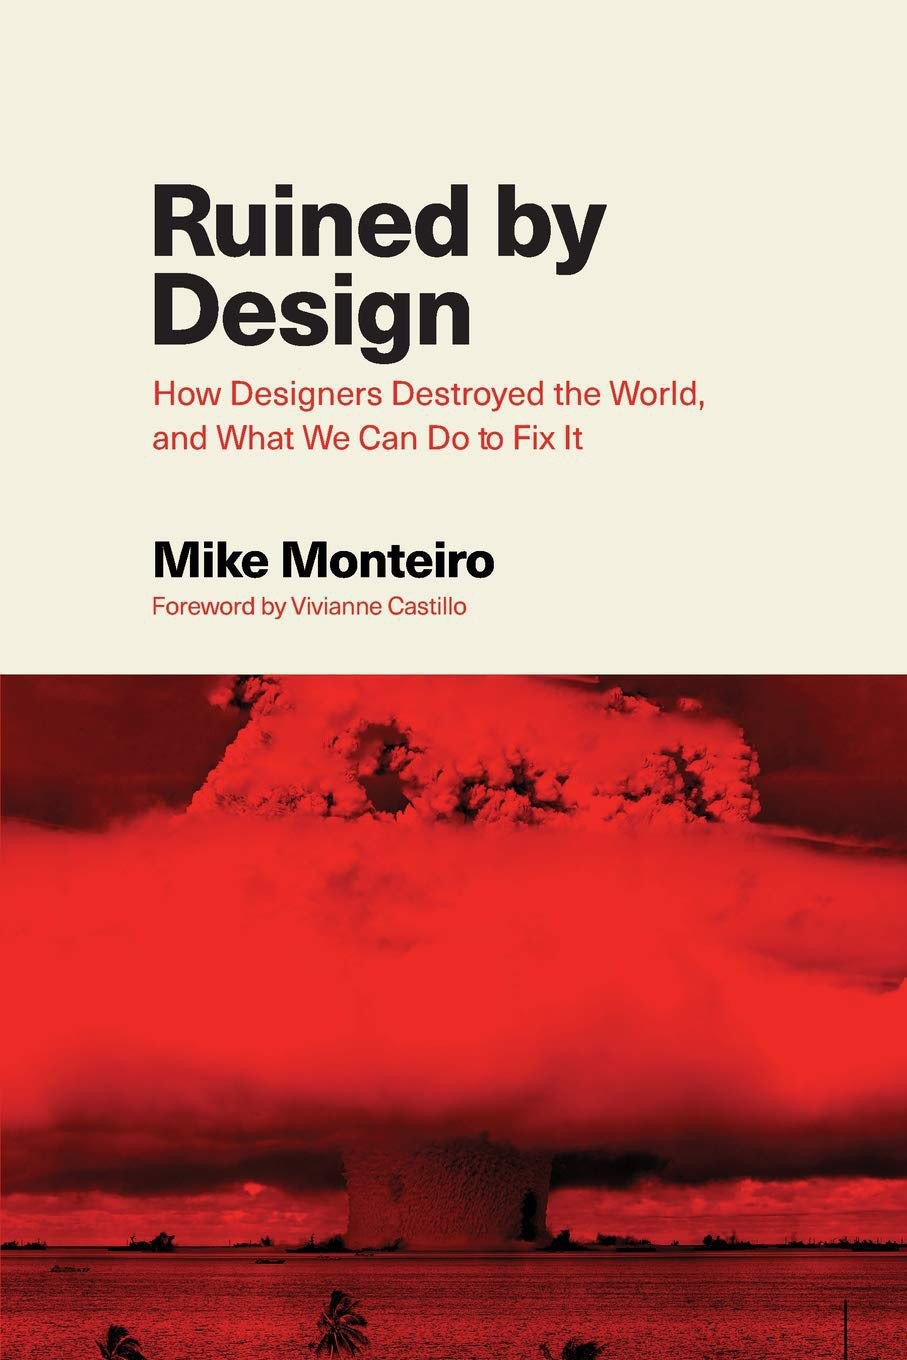 Mike Monteiro Ruined by Design: How Designers Destroyed the World, and What We Can Do to Fix It